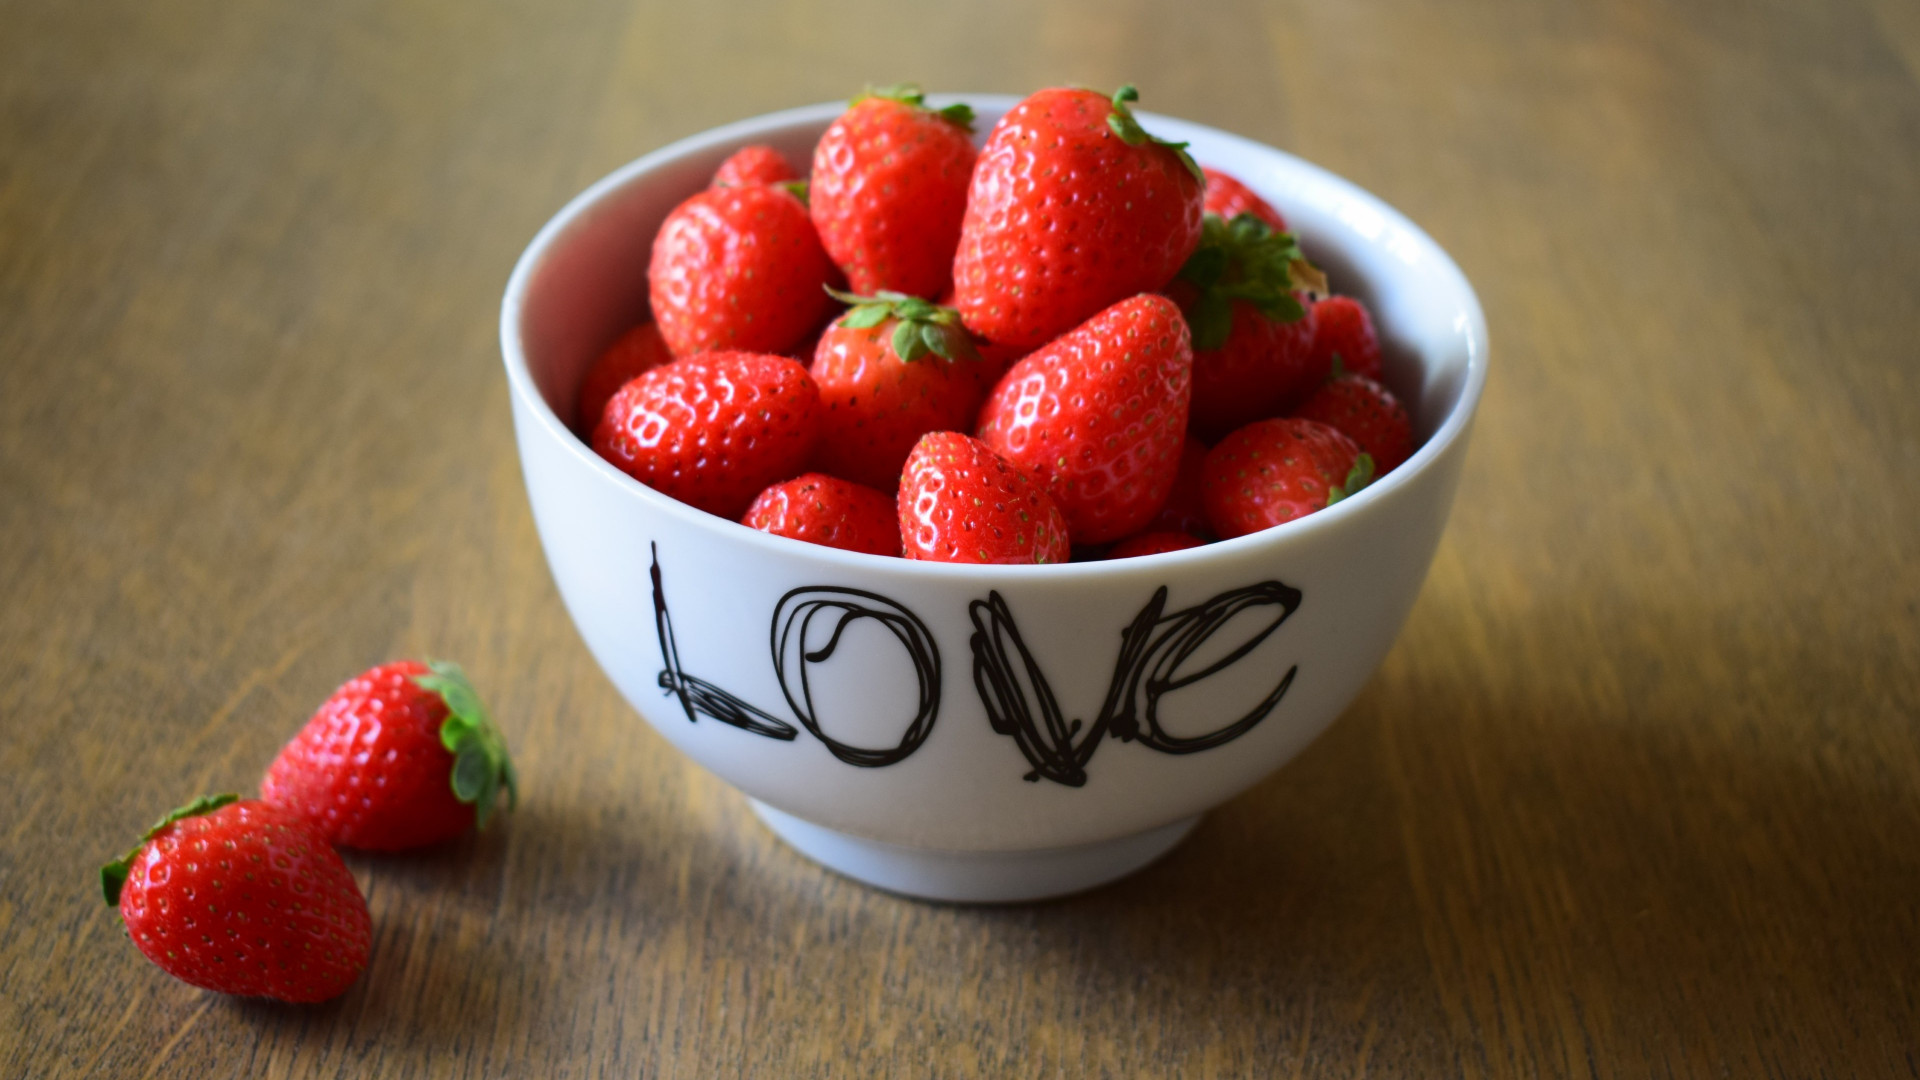 Strawberries with love wallpaper 1920x1080